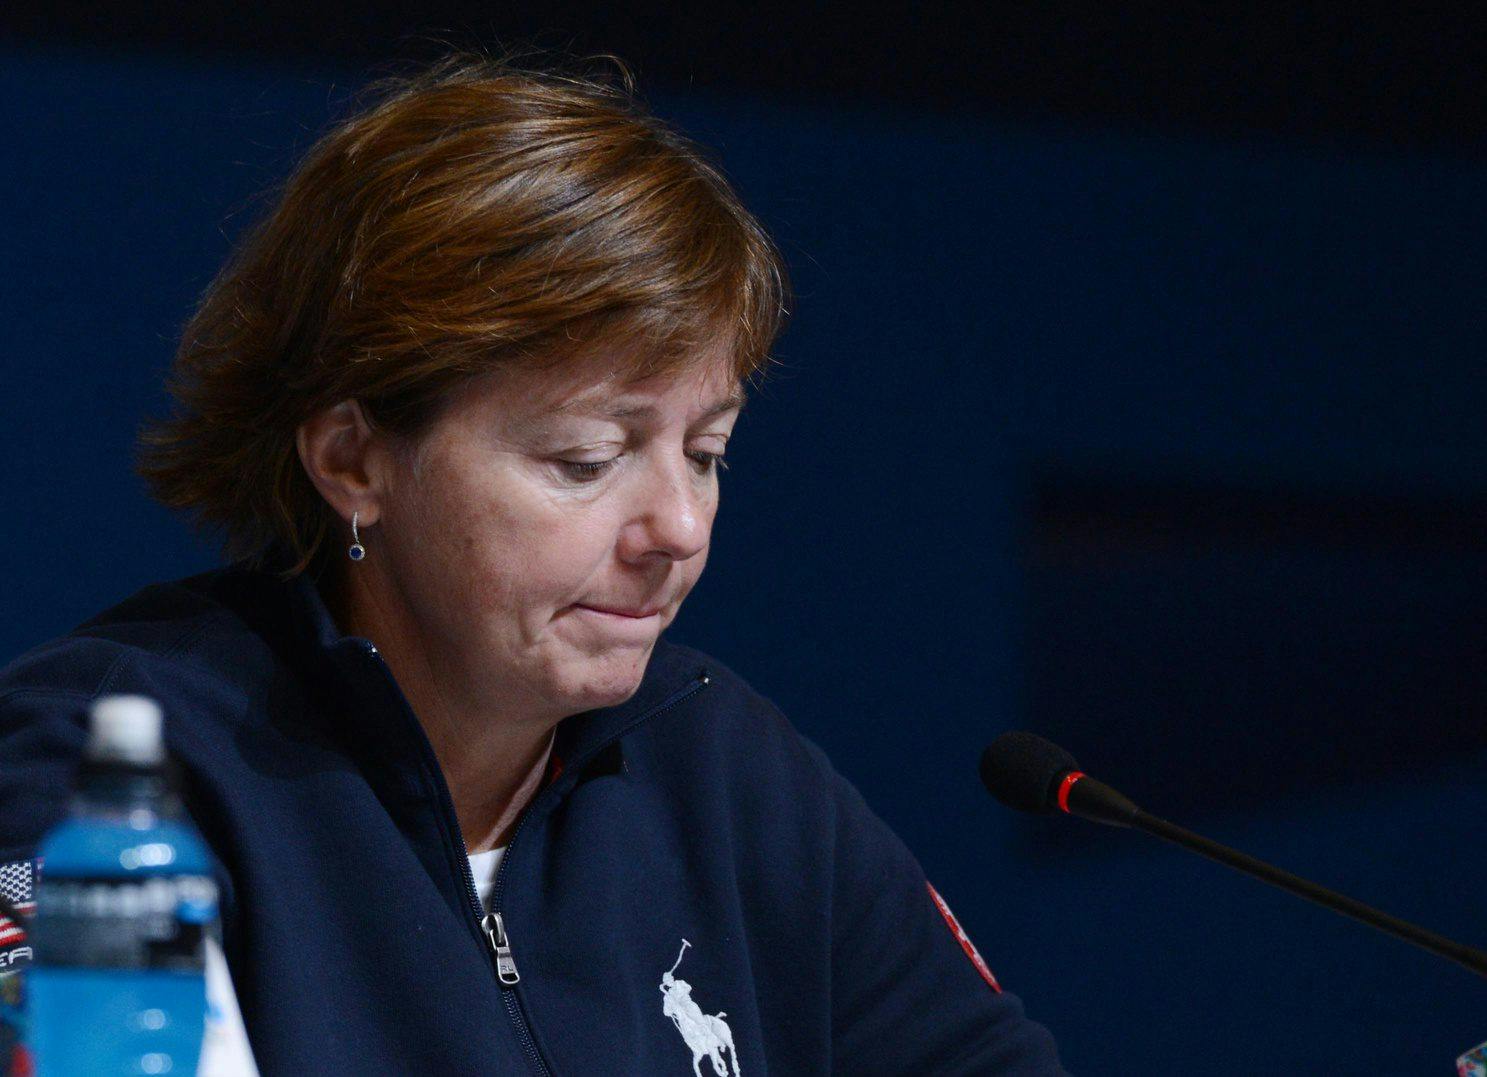 Harvard women’s hockey coach Katey Stone retires amid investigation for mistreatment of players